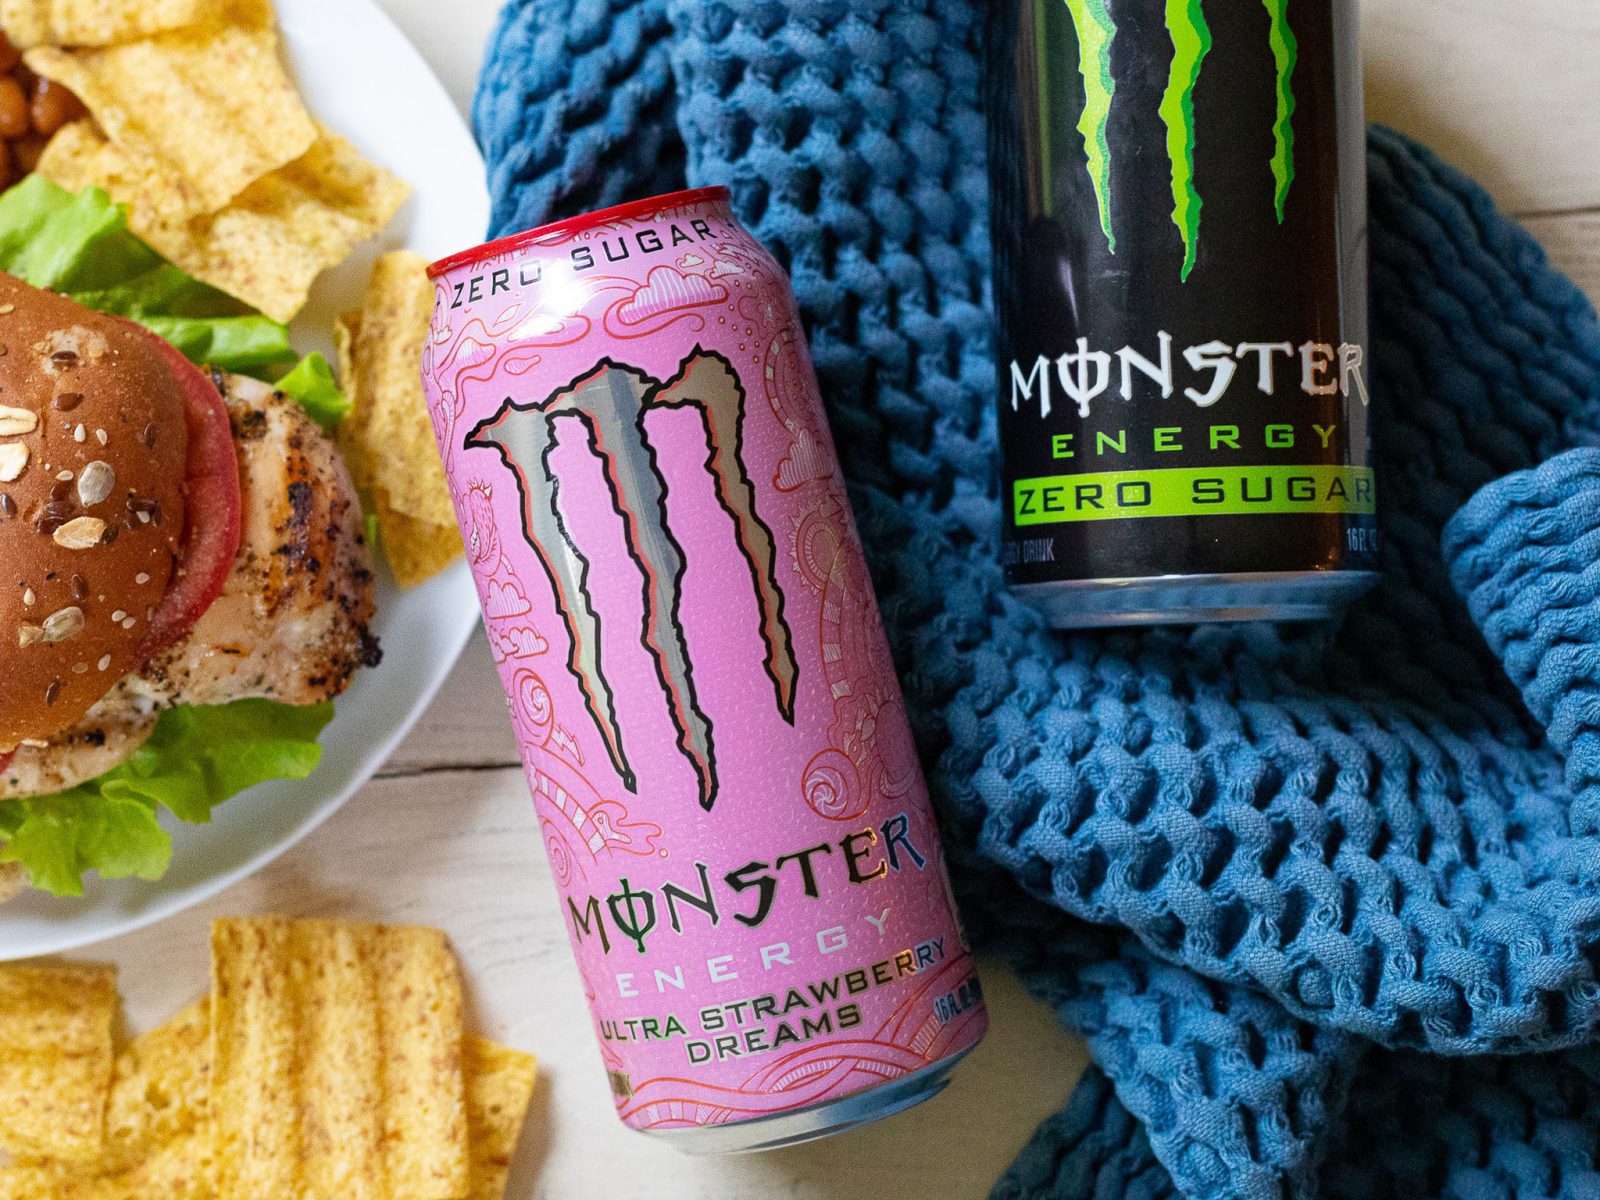 Get A Monster Zero Sugar Energy Drink For Just 83¢ At Publix